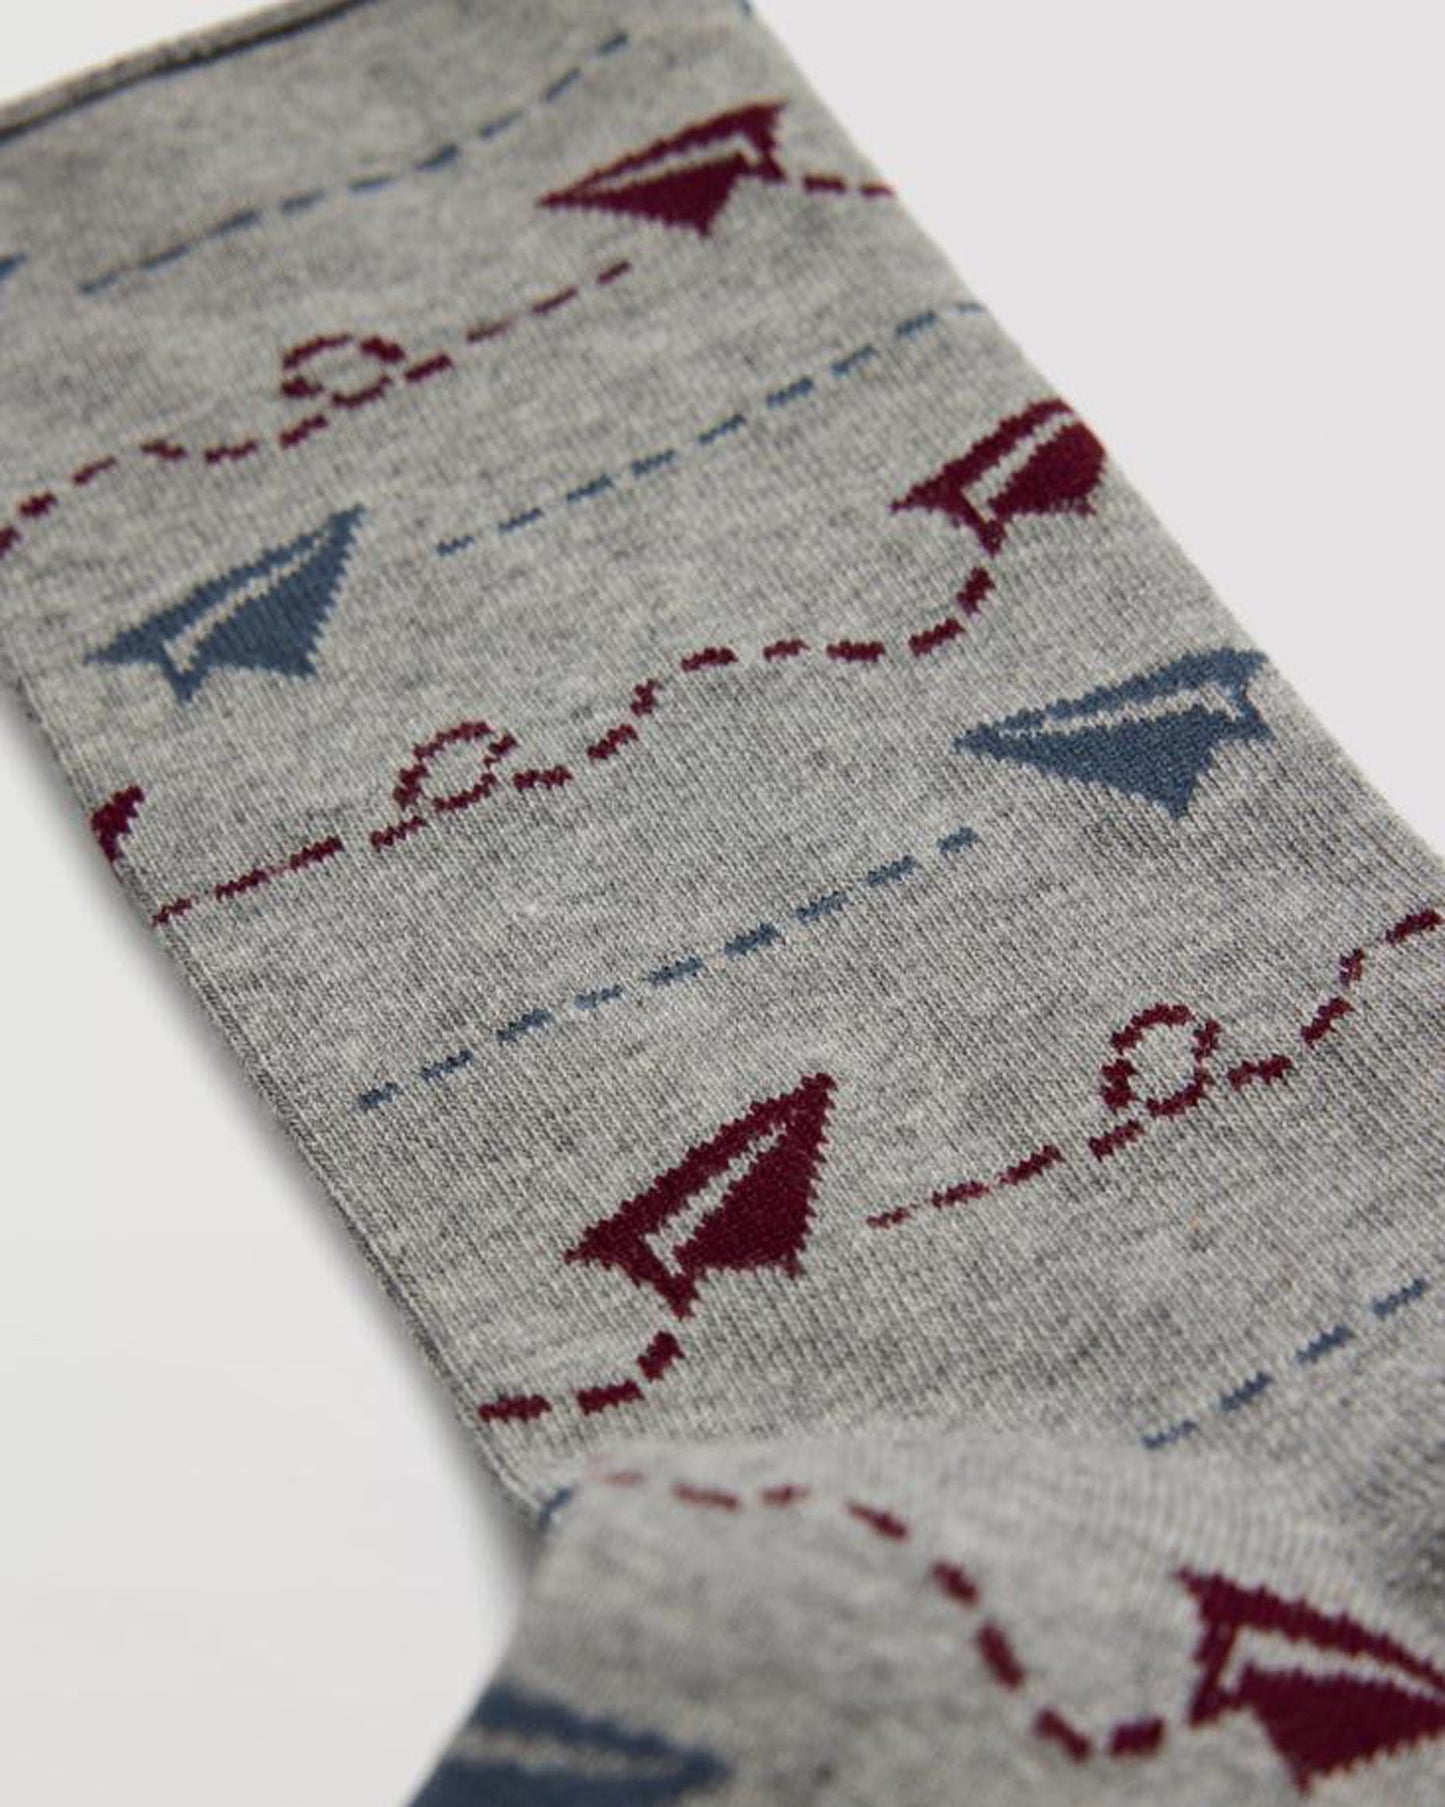 Ysabel Mora 22881 Paper Planes Sock - Light grey men's cotton mix crew length ankle socks with flying paper plains pattern in wine and denim blue and no cuff comfort cuff.